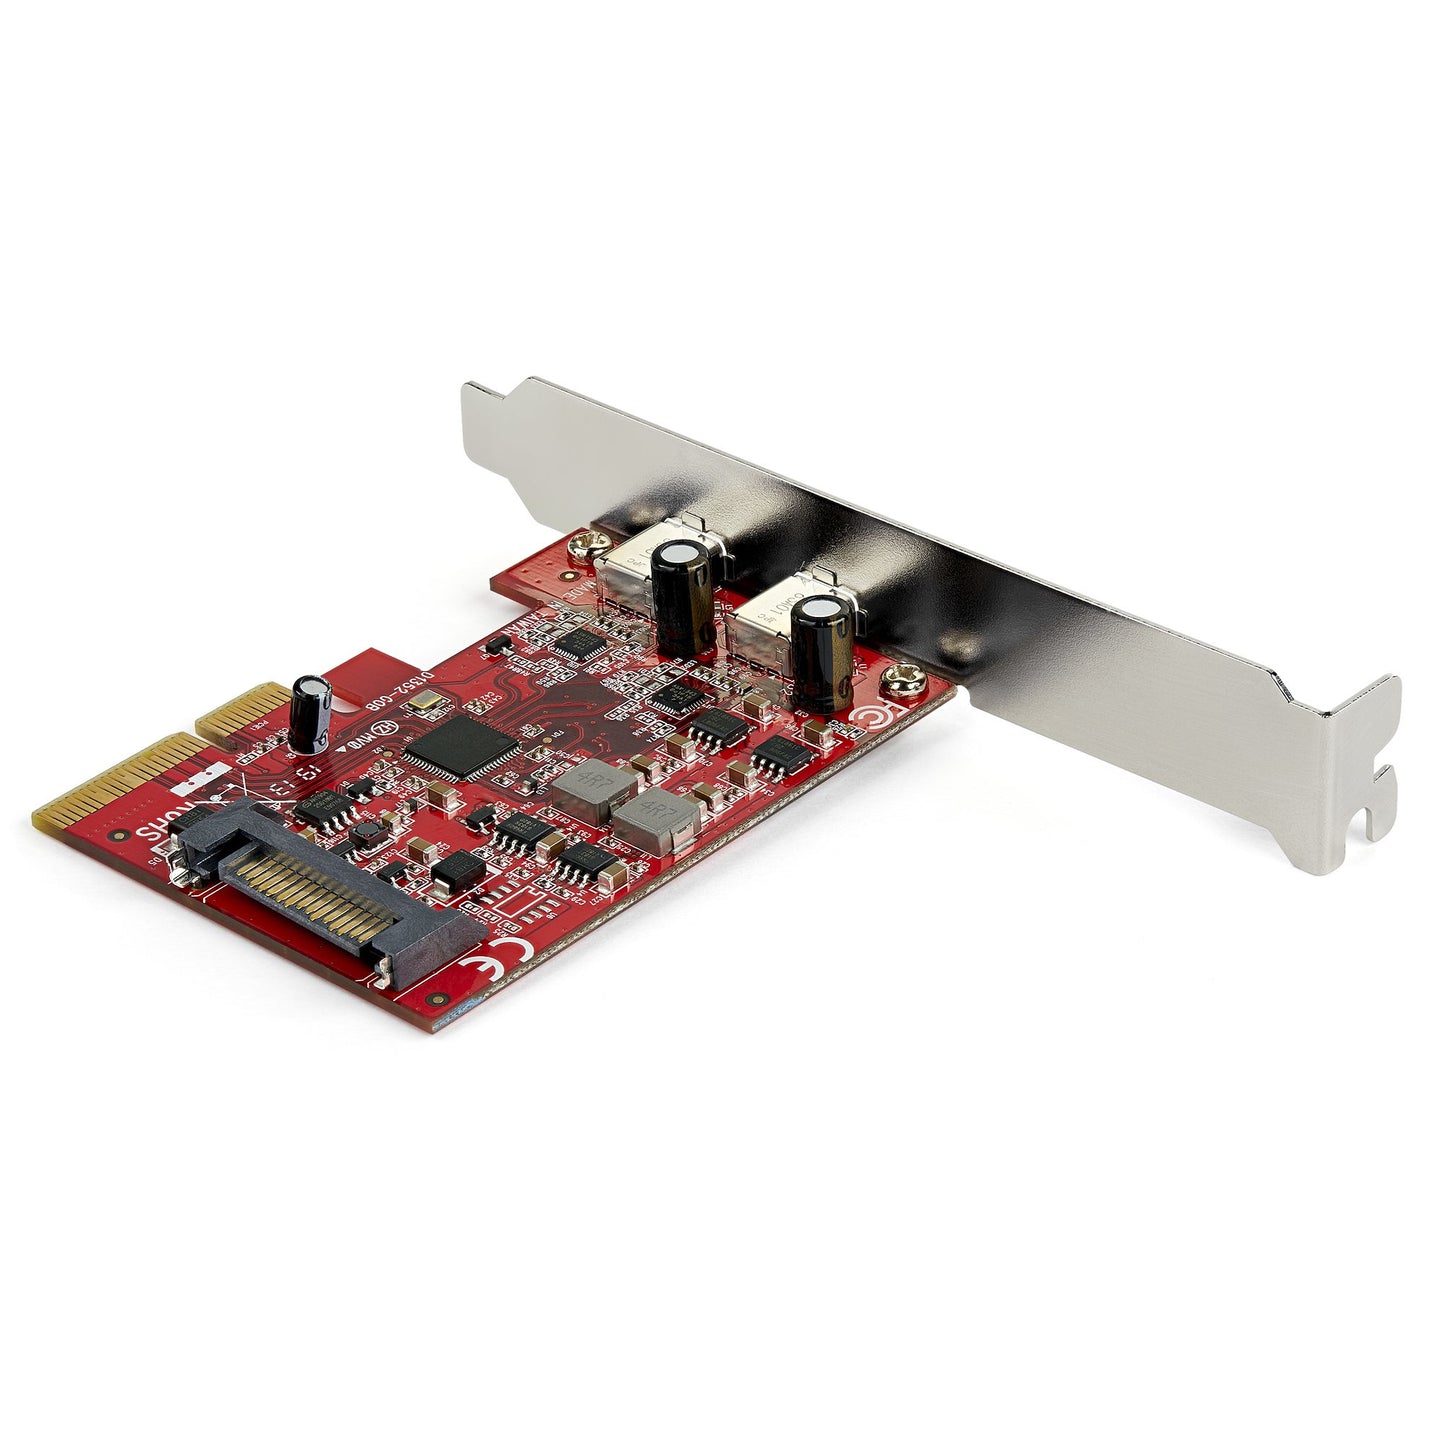 StarTech.com 2-port 10Gbps USB C PCIe Card - USB 3.1 Gen 2 Type-C PCI Express Host Controller Add-On Card - Expansion Card - USB 3.2 Gen 2x1 PCIe Adapter 15W/port - Windows, macOS, Linux-1